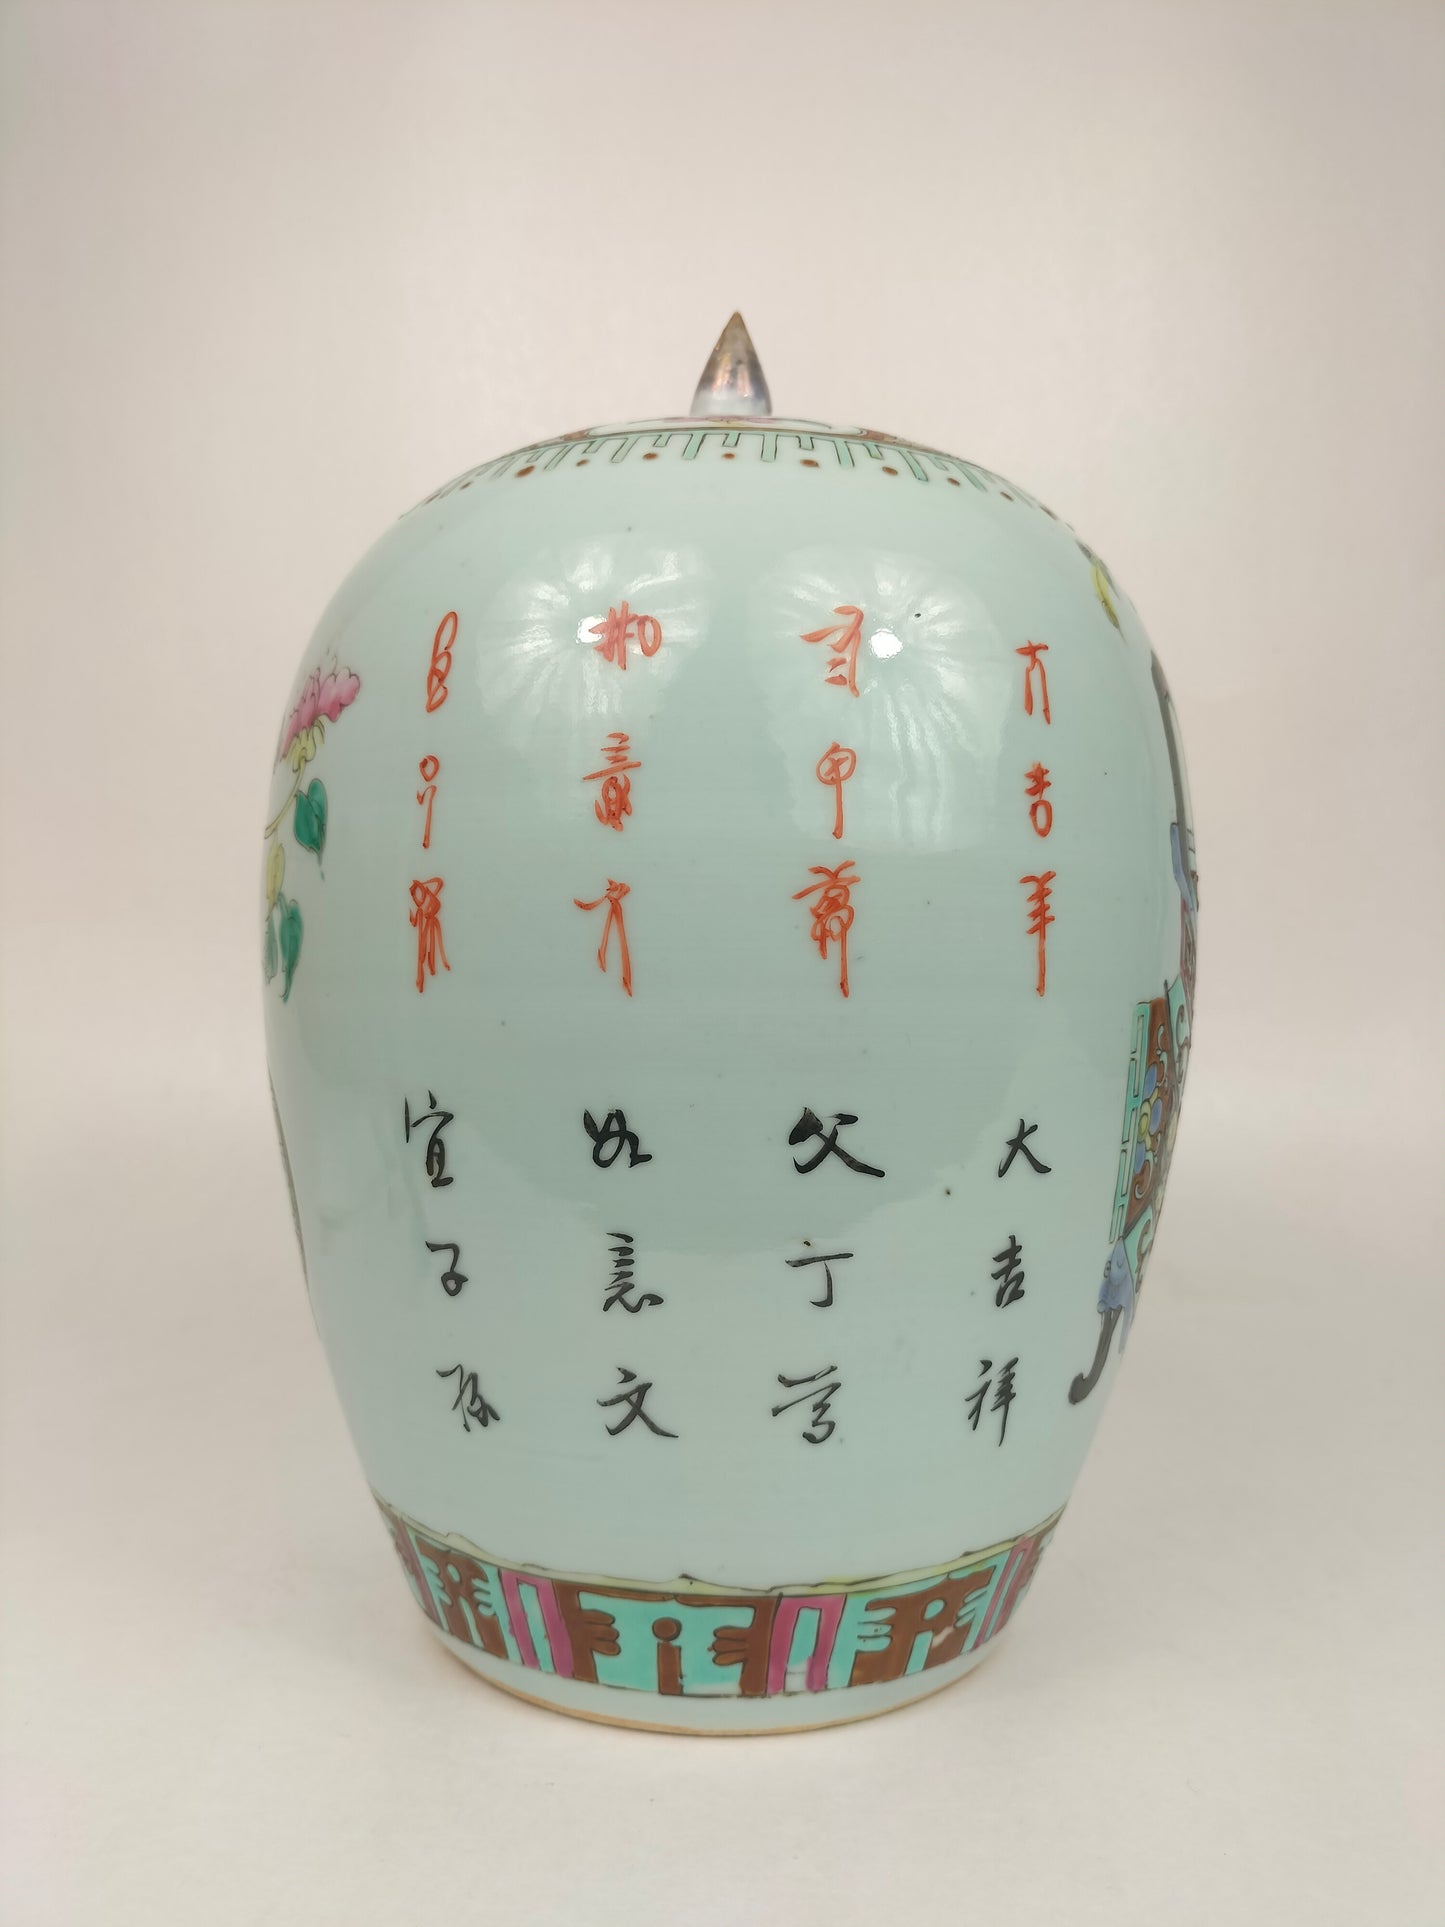 Antique Chinese famille verte ginger jar decorated with flower baskets // Qing Dynasty - 19th century